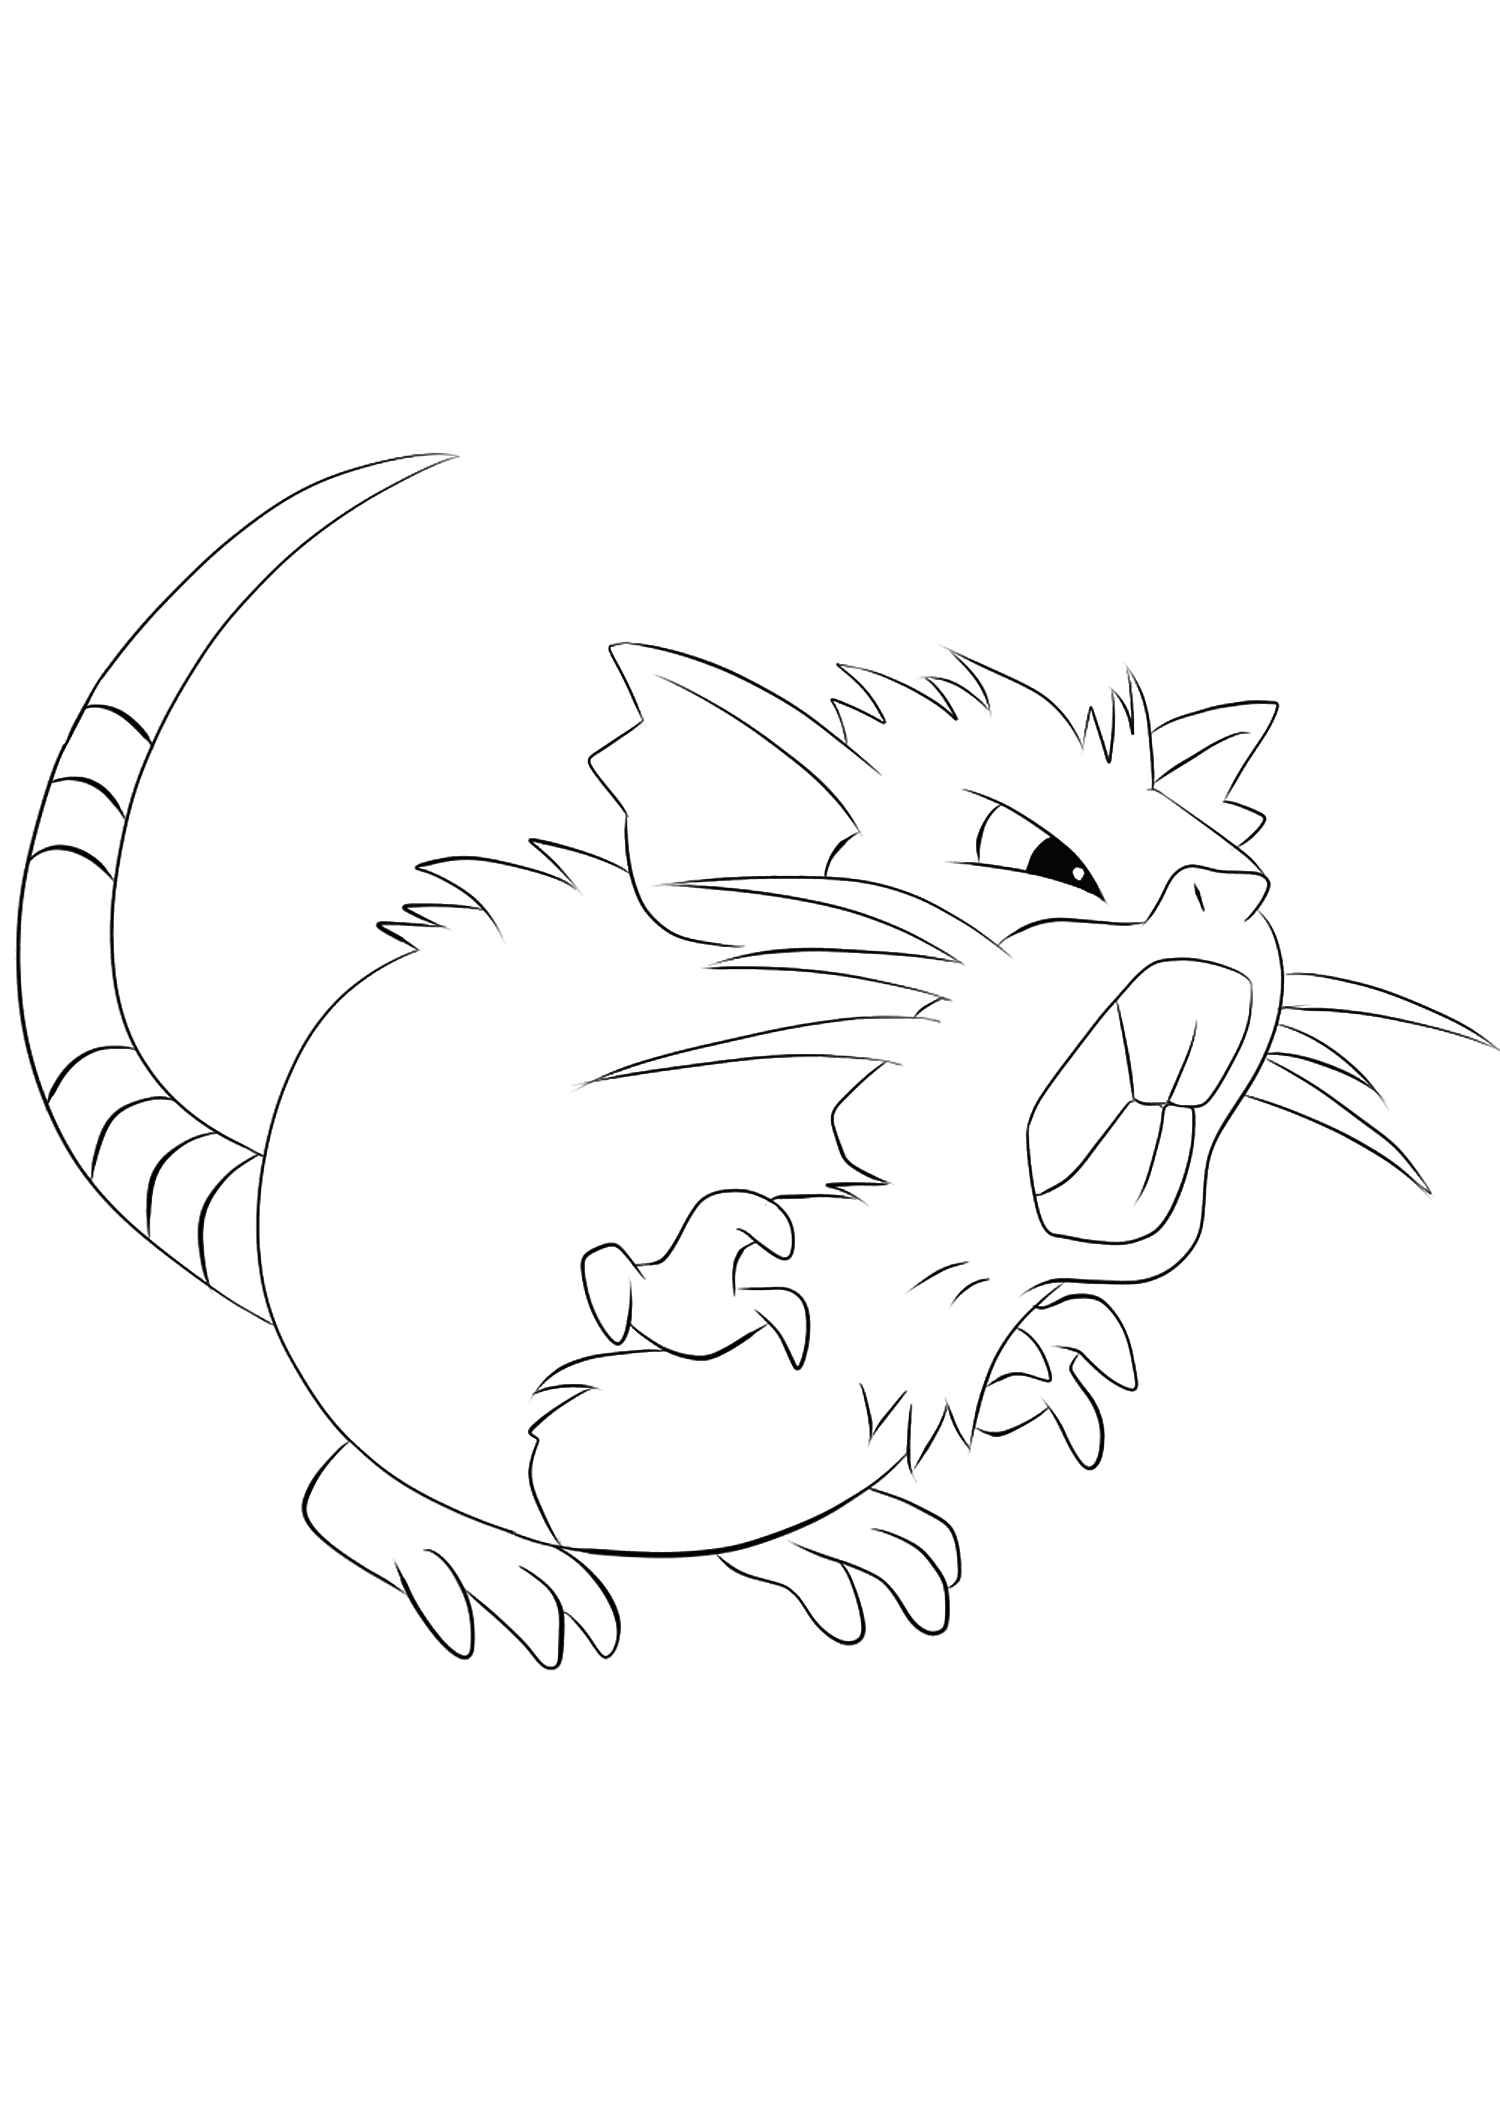 Raticate (No.20). Raticate Coloring page, Generation I Pokemon of type Dark and NormalOriginal image credit: Pokemon linearts by Lilly Gerbil'font-size:smaller;color:gray'>Permission: All rights reserved © Pokemon company and Ken Sugimori.